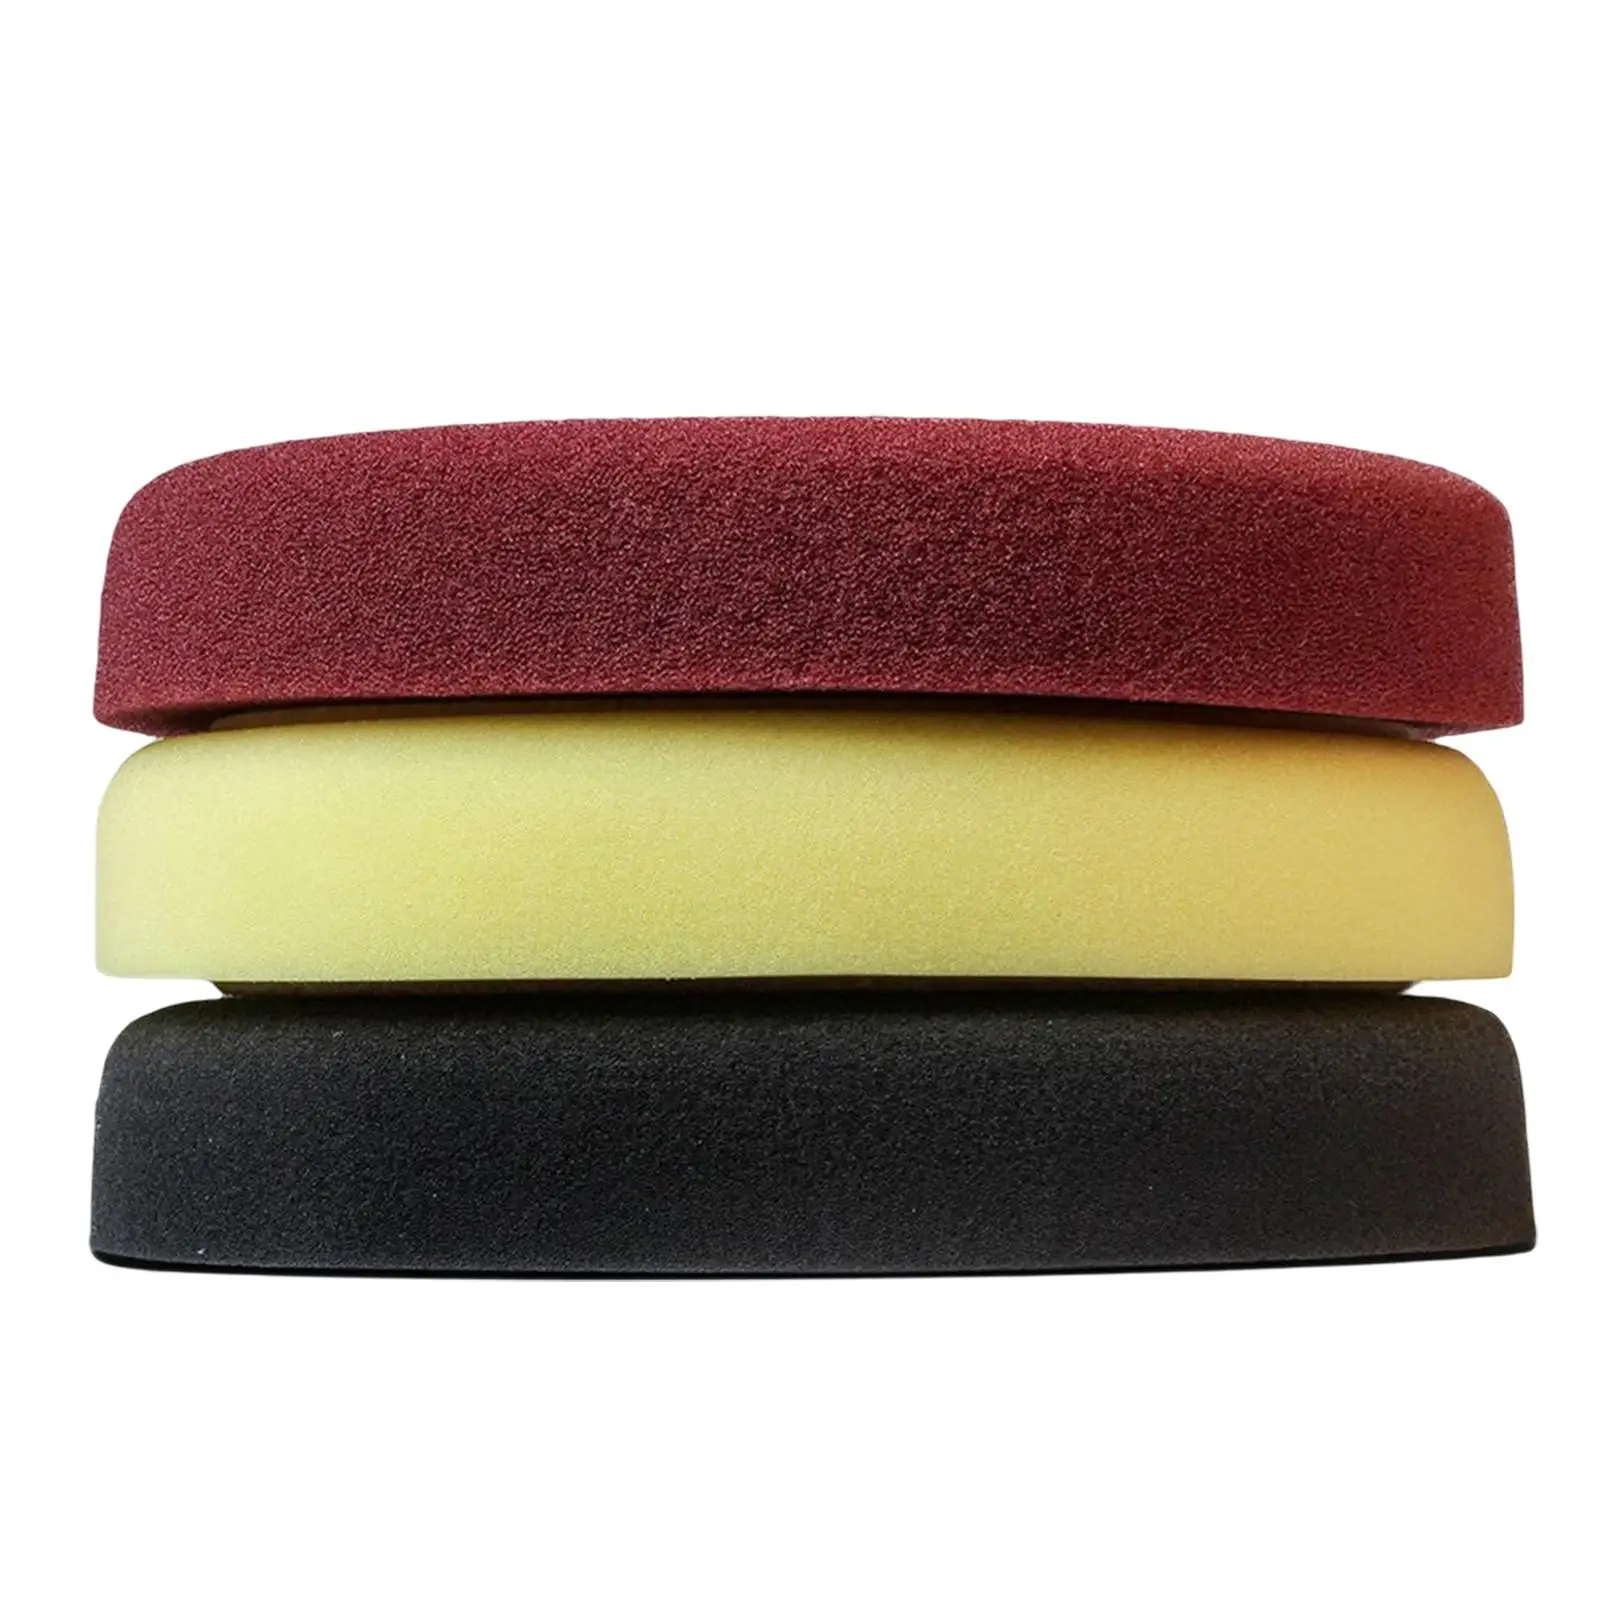 3Pcs 7 Inches car Polishing Pads Compound Buffing Sponge Pads Buffing Waxing for Car Buffer Polisher Cleaning Waxing